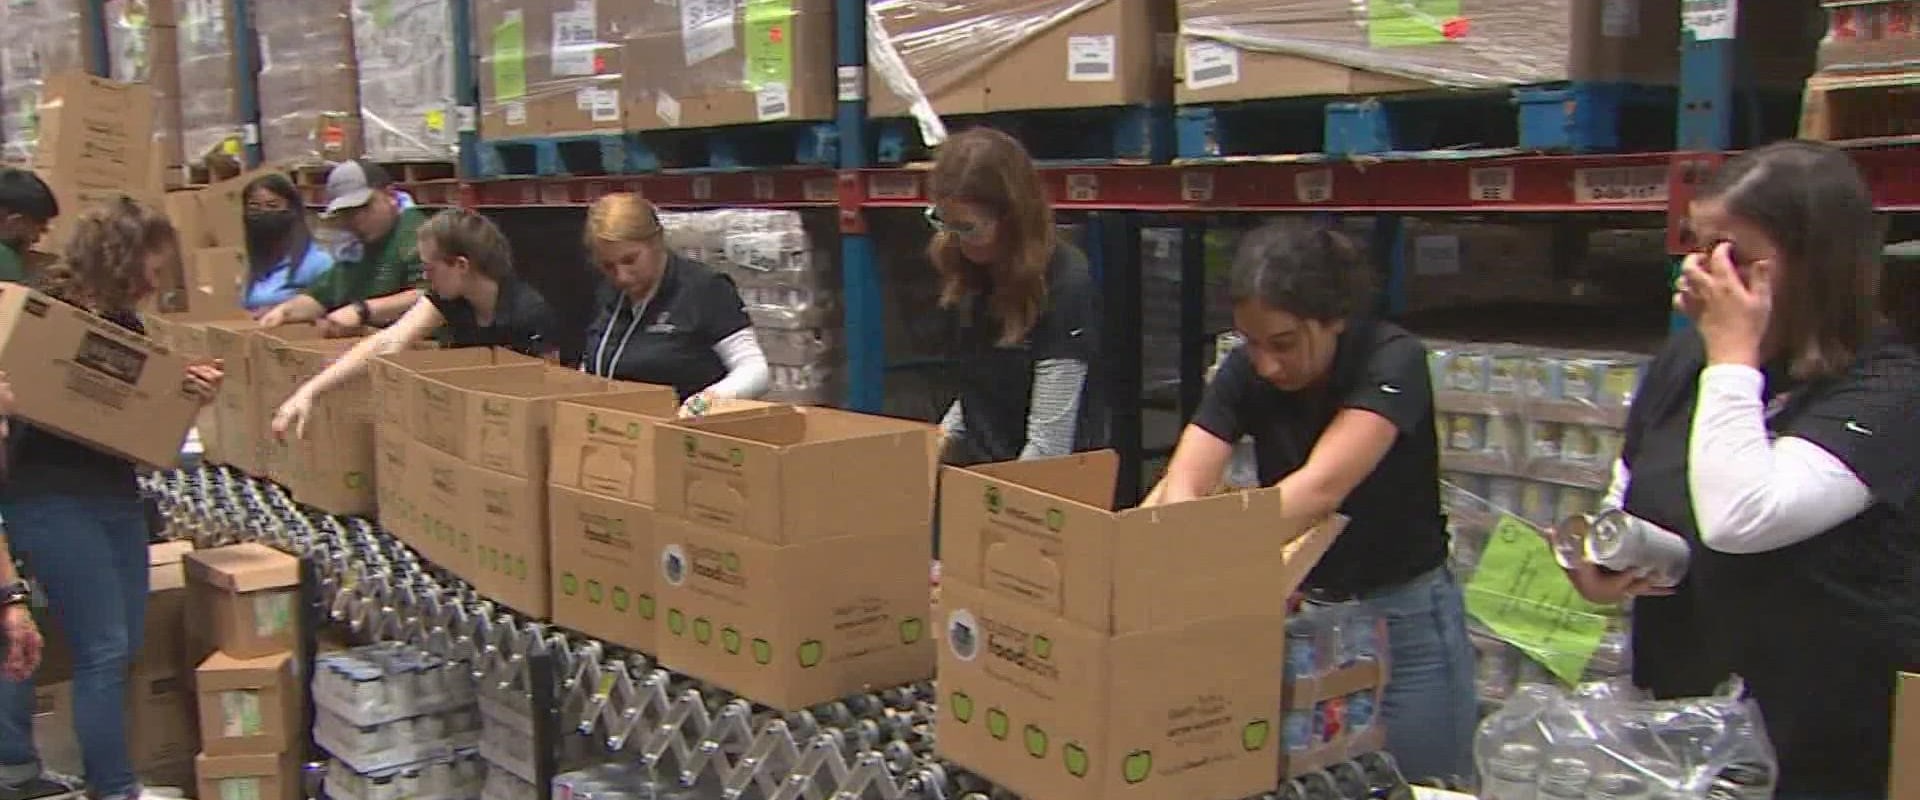 Can You Work at a Food Bank? A Comprehensive Guide